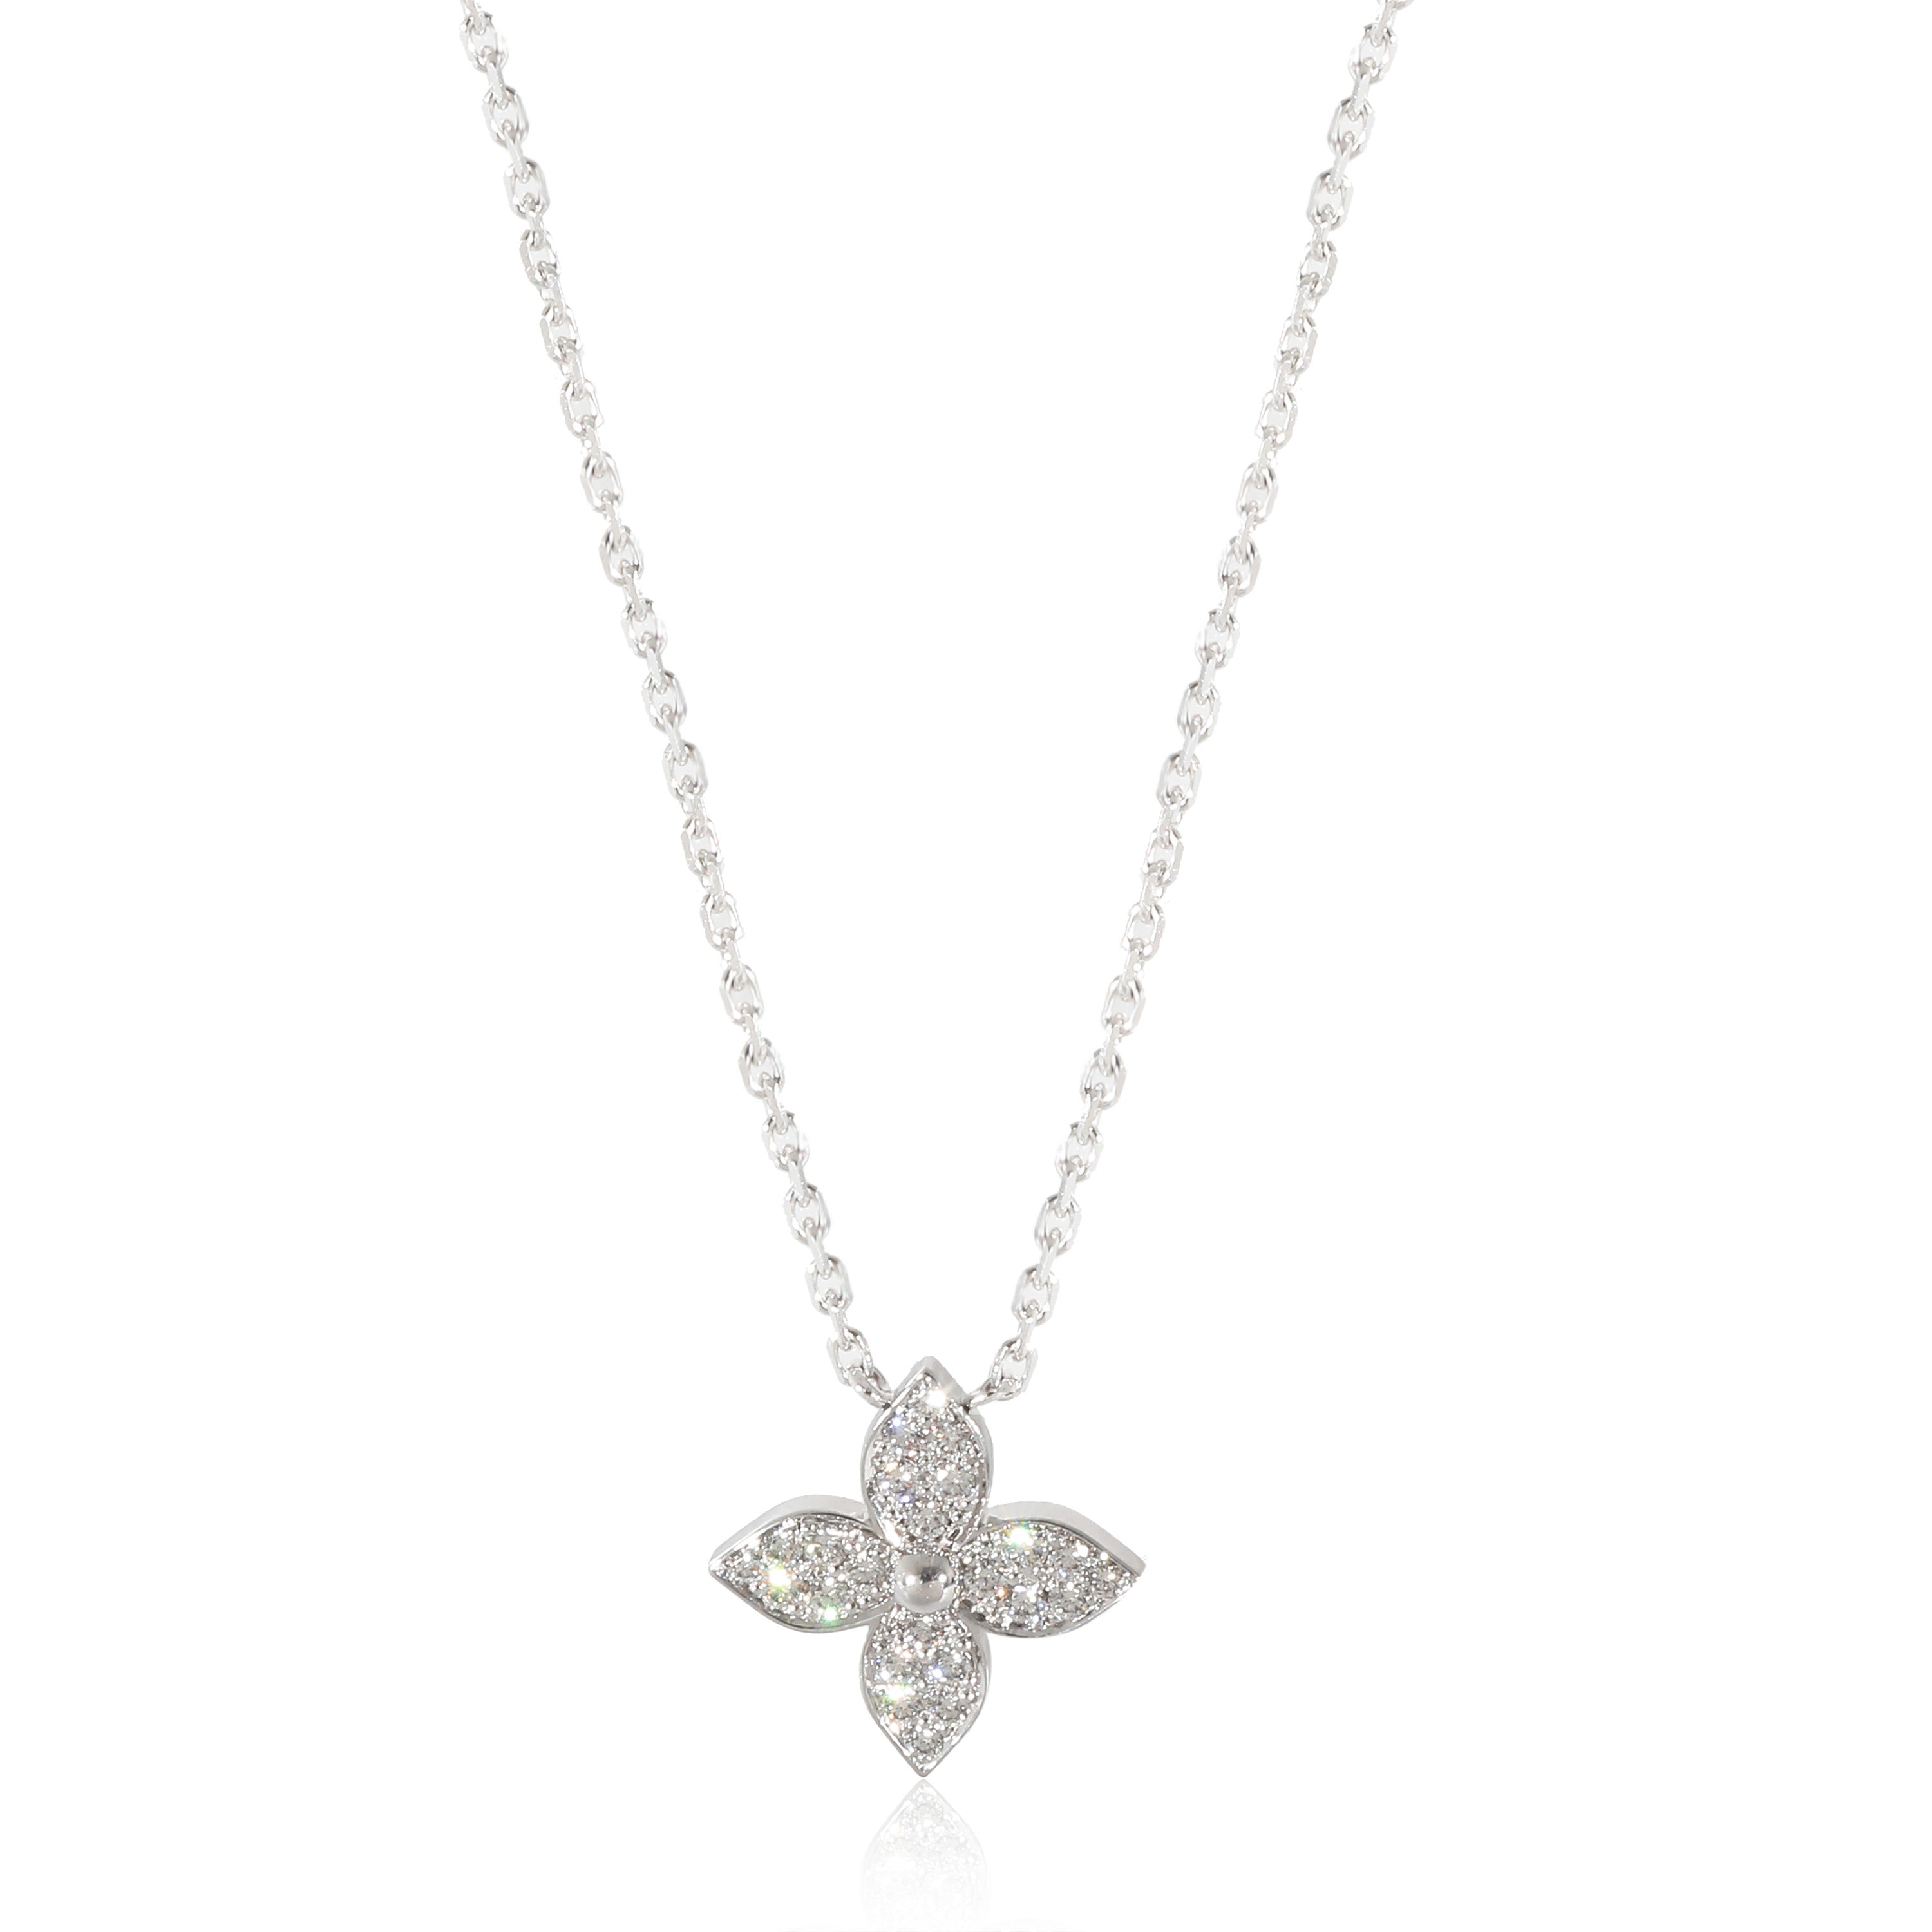 Idylle Blossom Pendant, White Gold And Diamonds - Jewelry - Categories